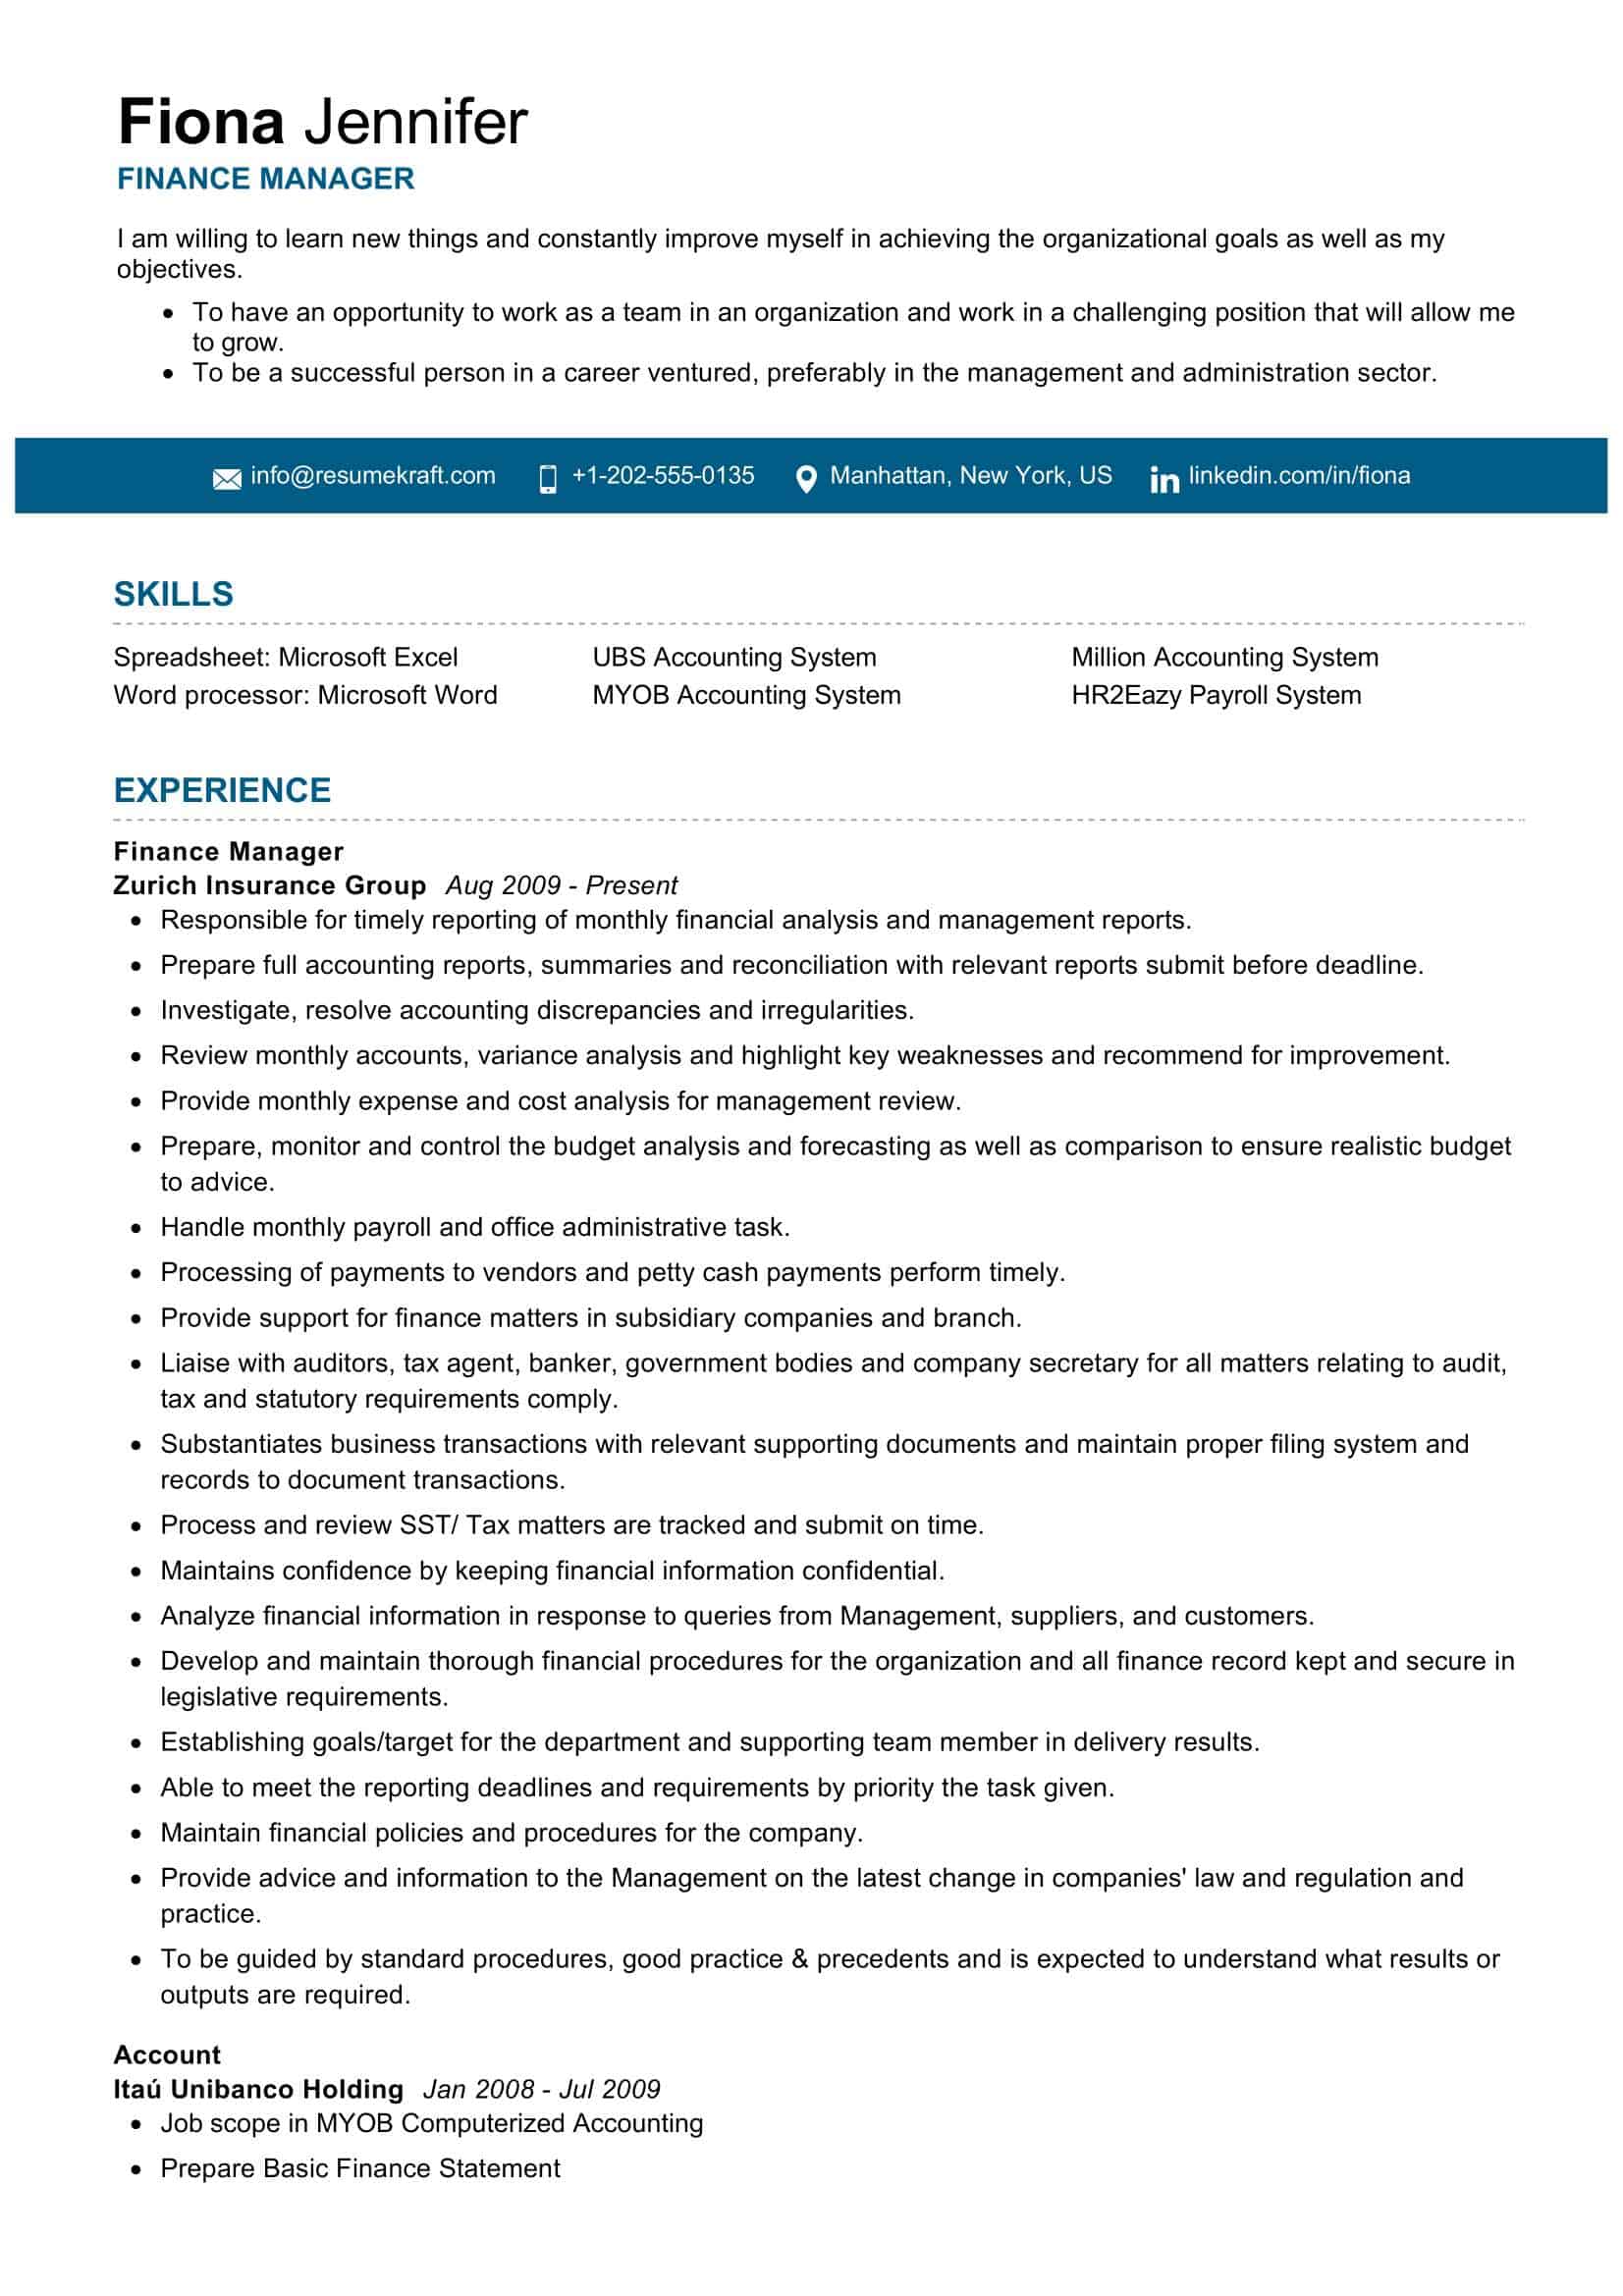 Example Cv For Finance Manager  Assistant Finance Manager Resume